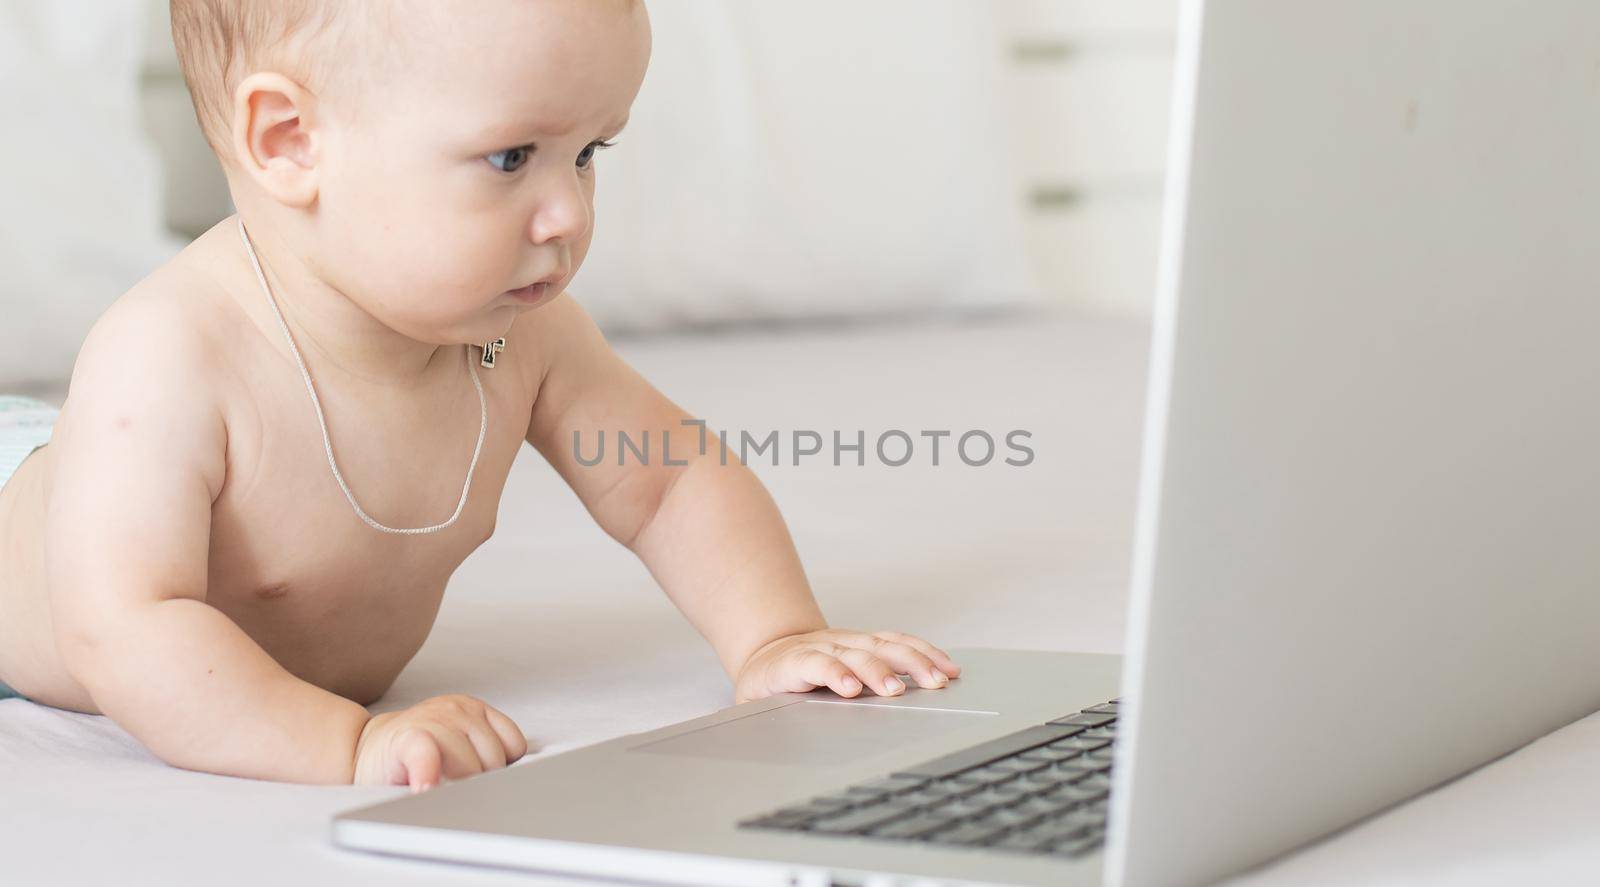 A baby and a computer, head shot laptop by Andelov13